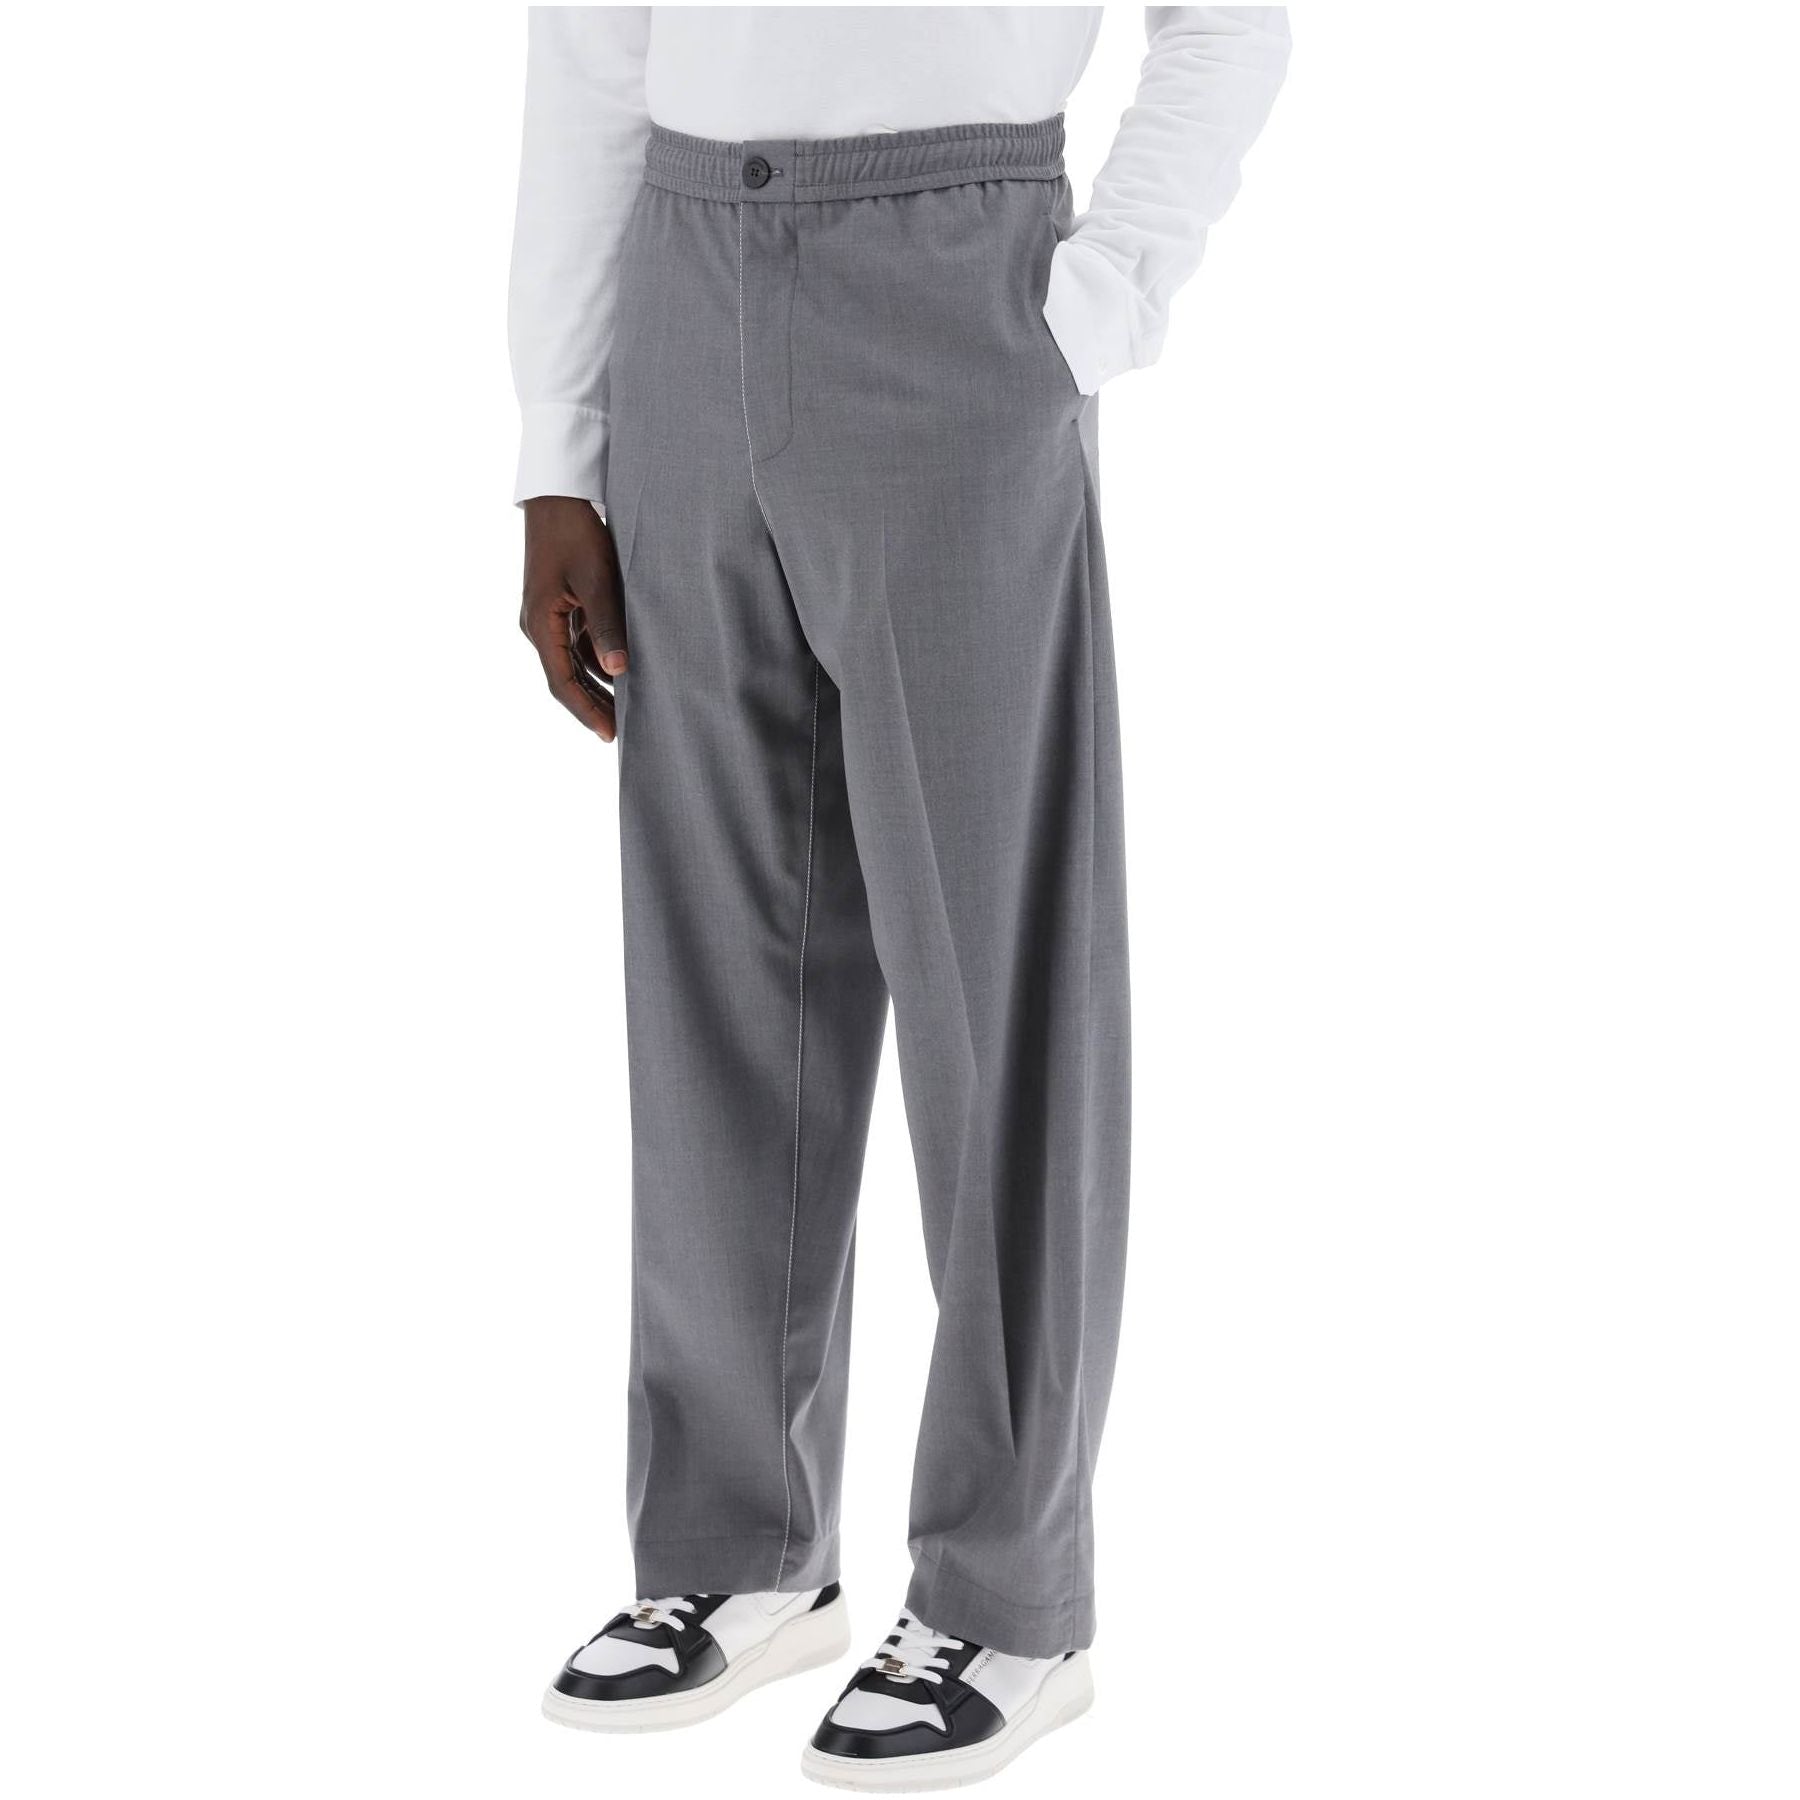 Lightweight Virgin Wool Tailored Trousers In Canvas Fabric